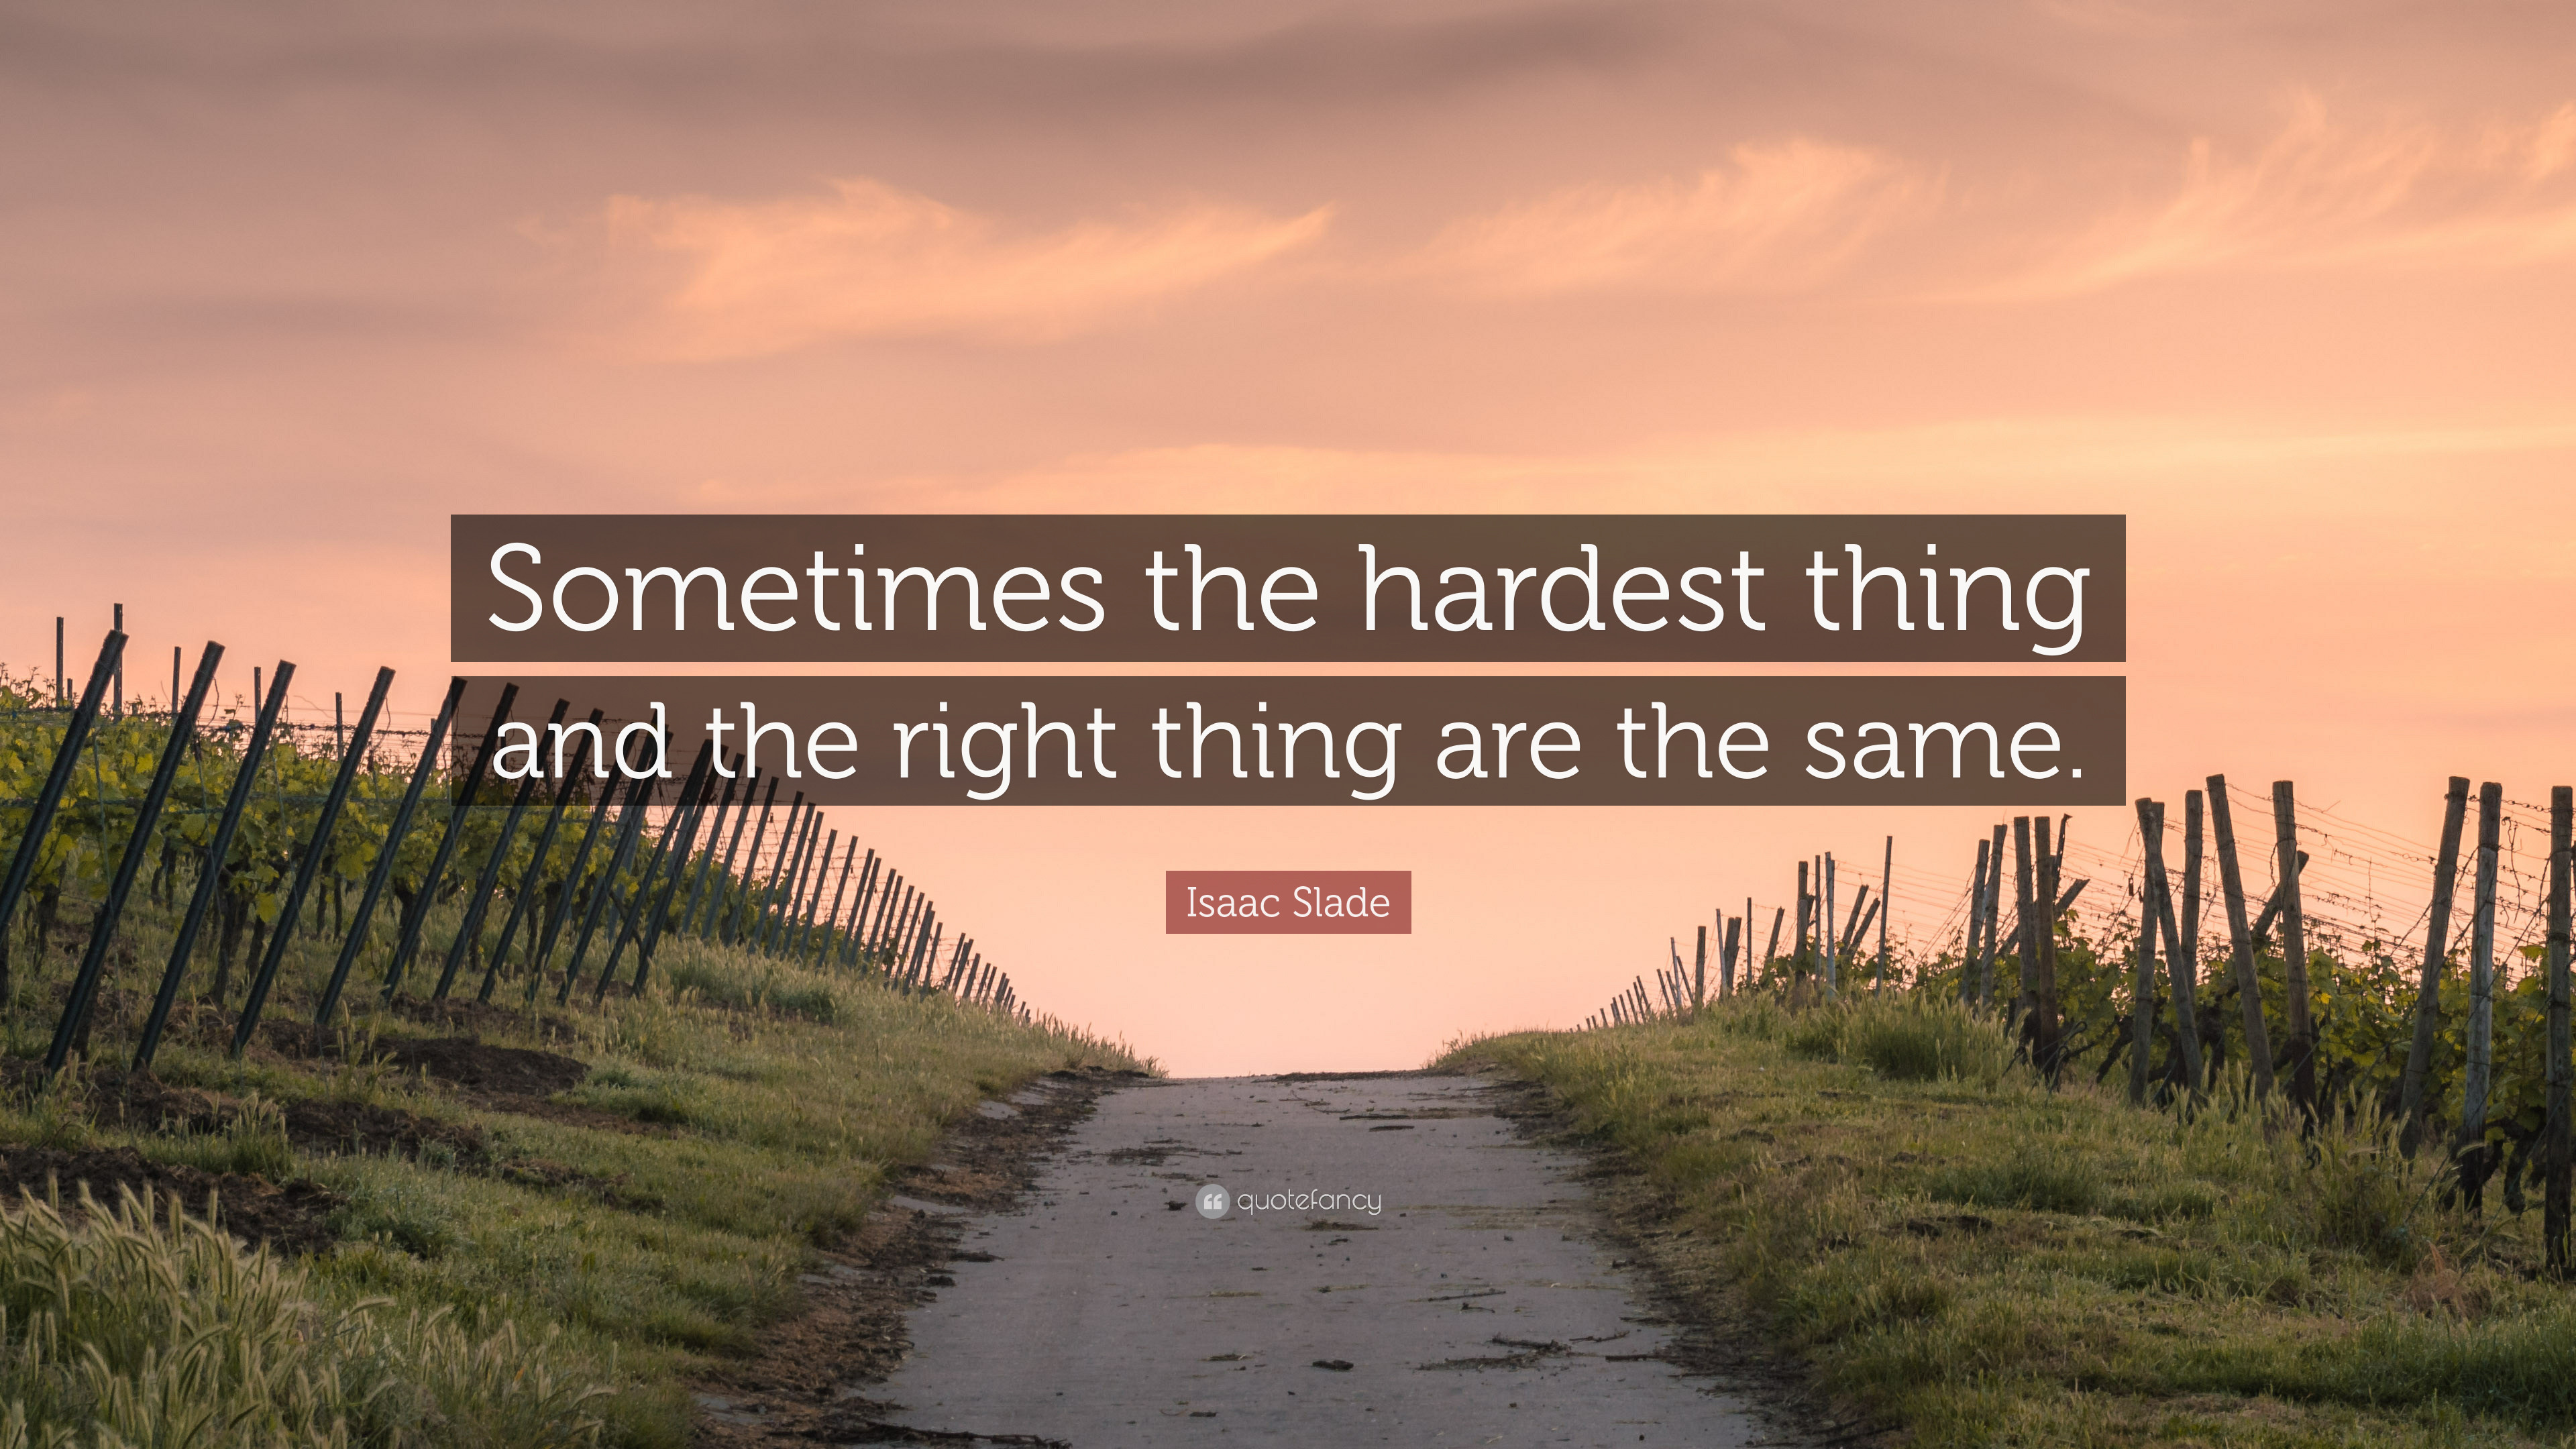 3840x2160 Isaac Slade Quote: “Sometimes the hardest thing and the right thing are the  same